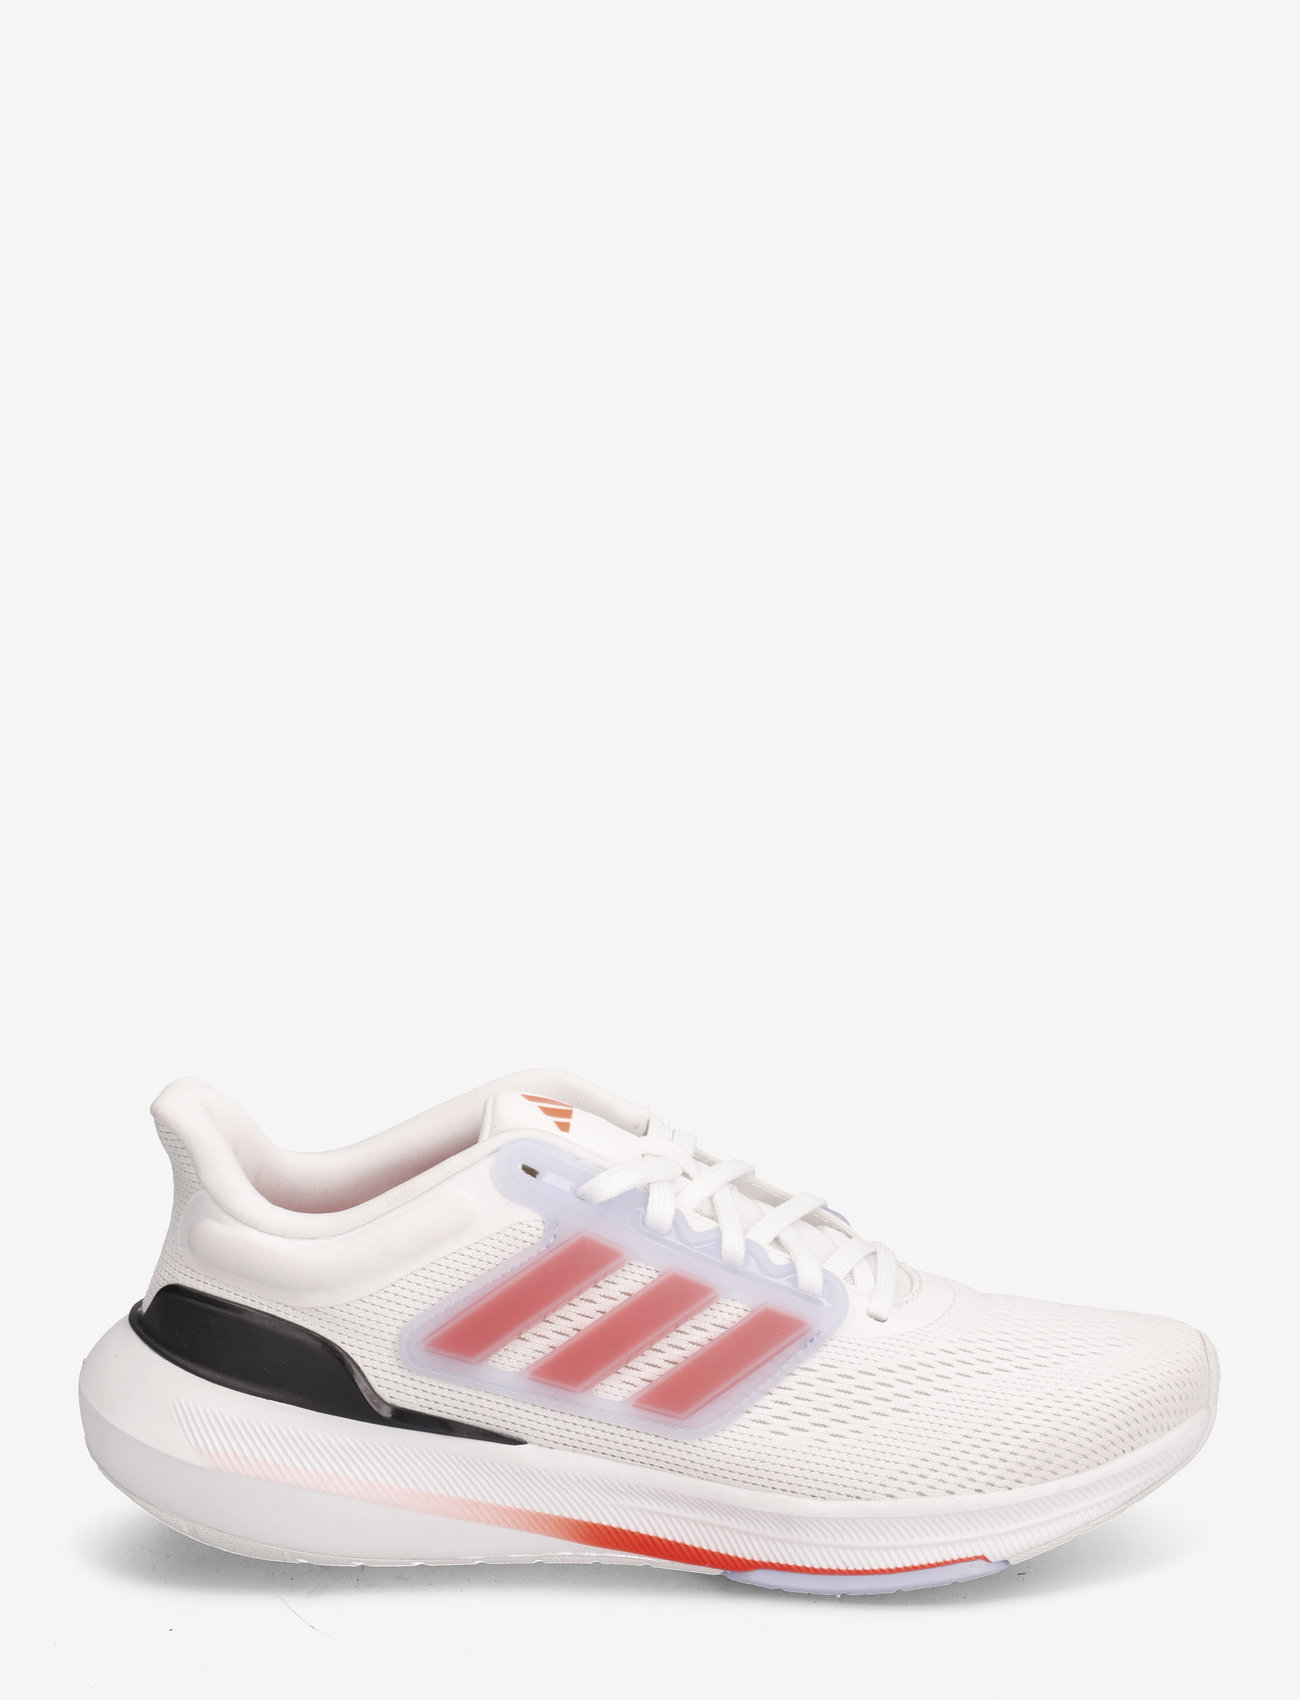 adidas Performance - Ultrabounce Shoes - laufschuhe - ftwwht/solred/crywht - 1